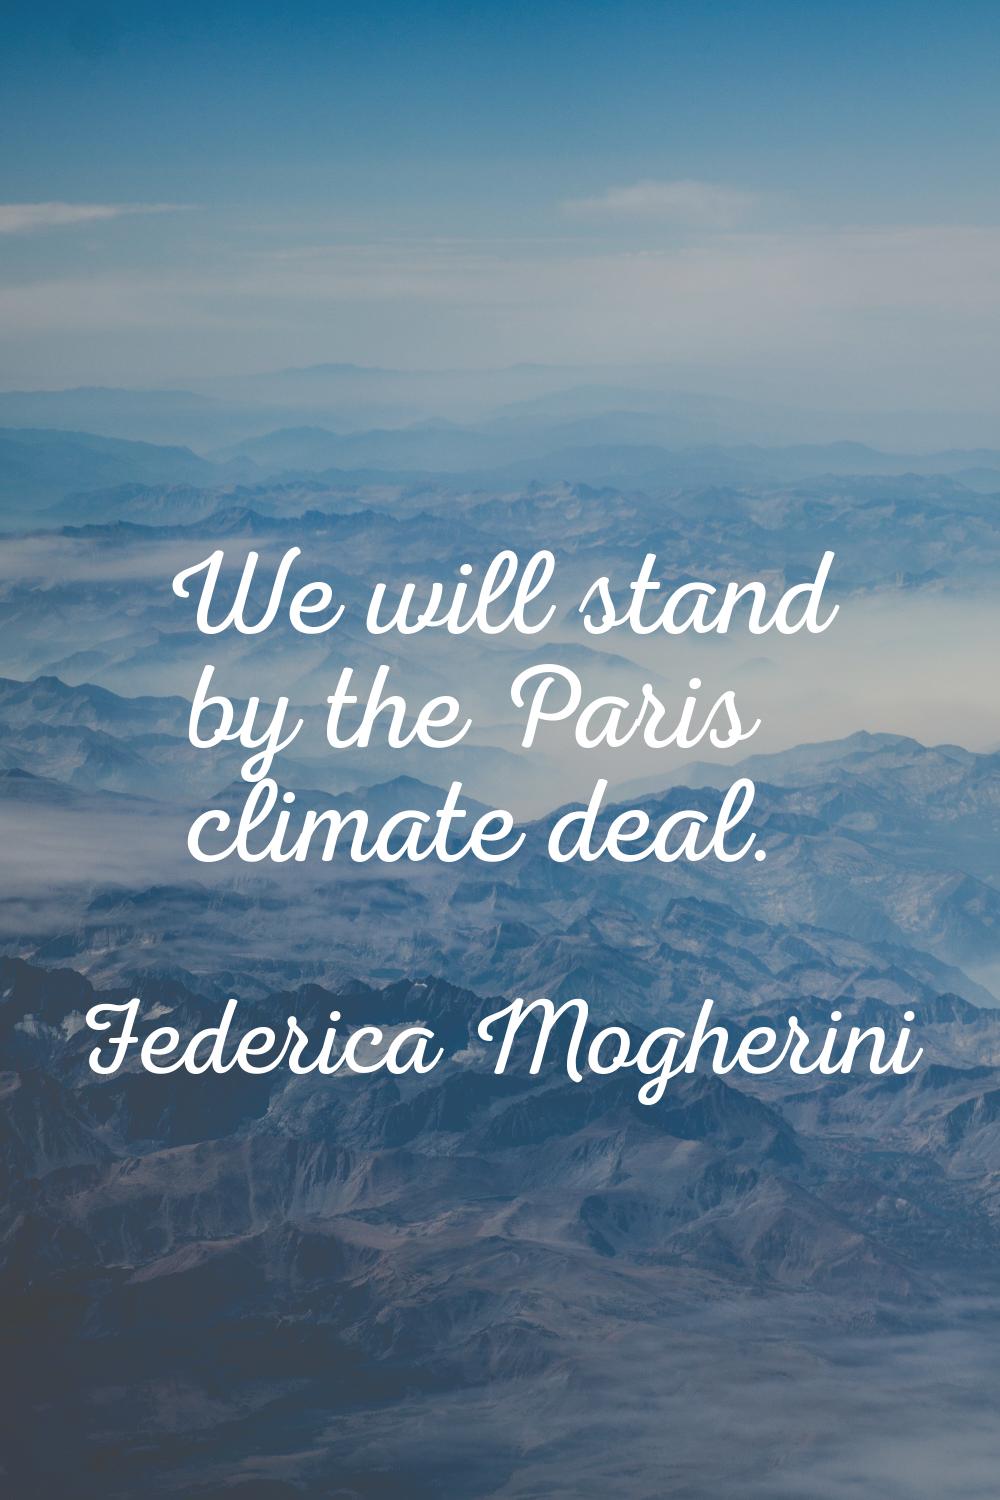 We will stand by the Paris climate deal.